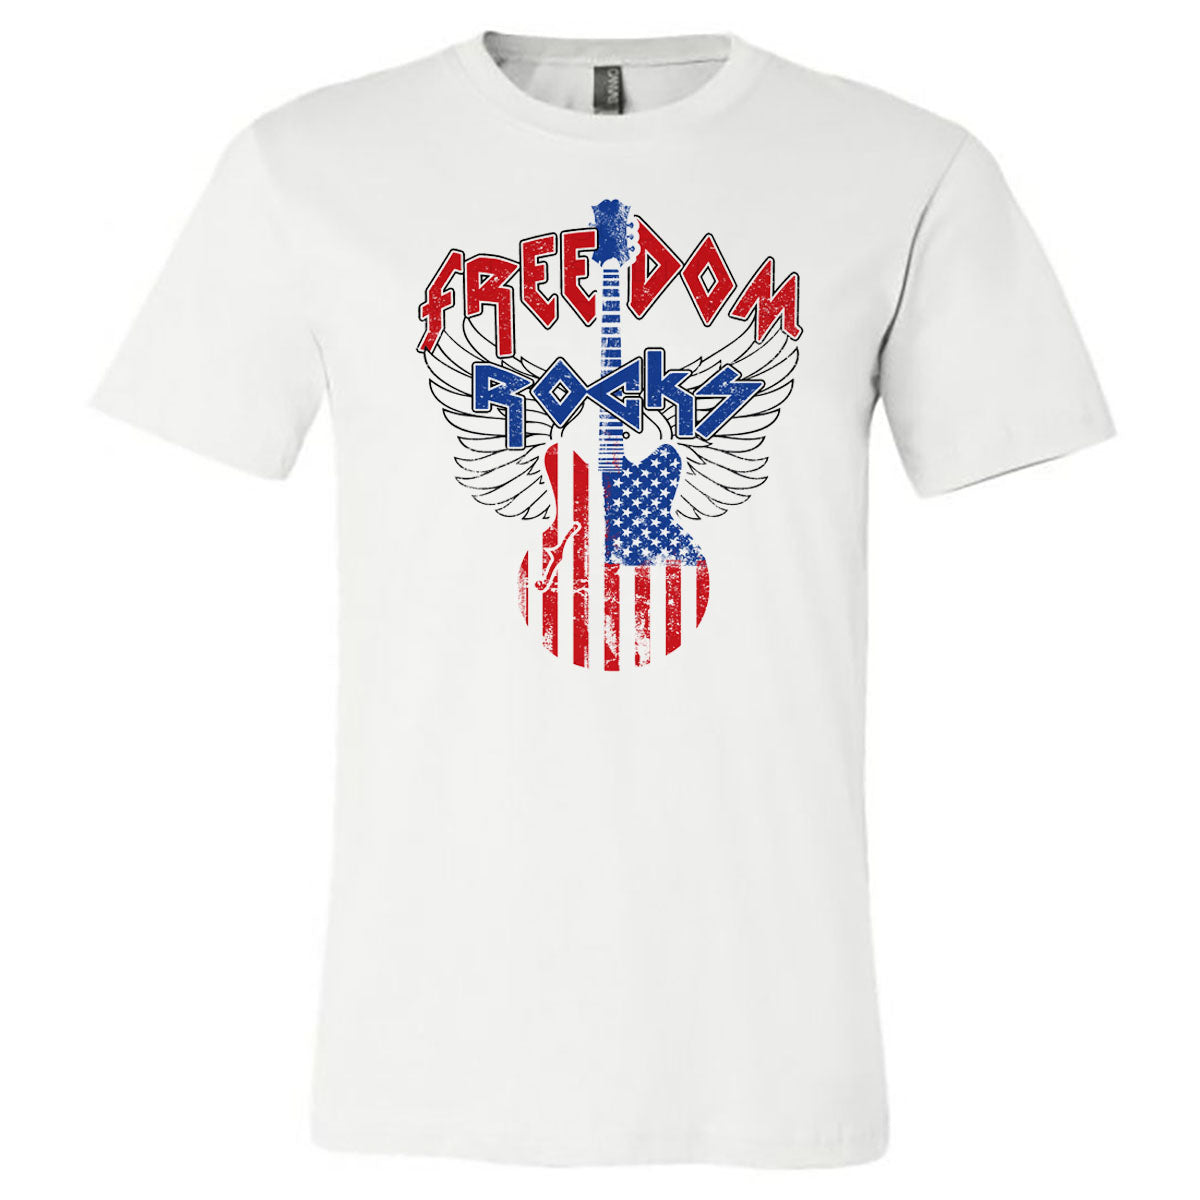 Freedom Rocks - White Tee - Southern Grace Creations